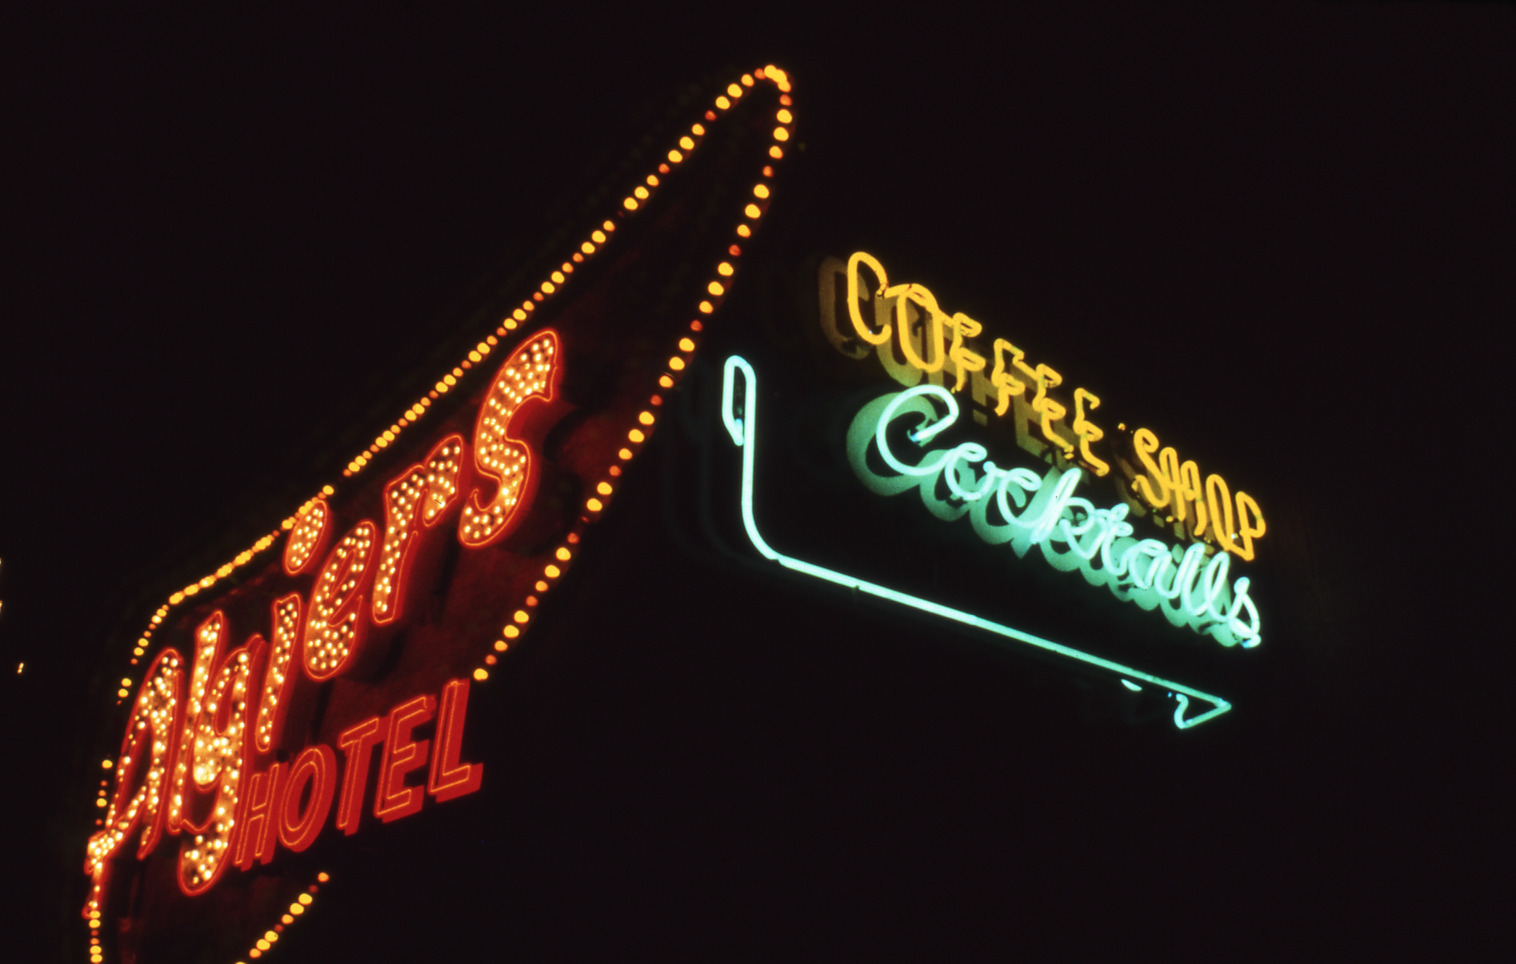 Algiers Hotel lettering and wall signs, Las Vegas, Nevada: photographic print